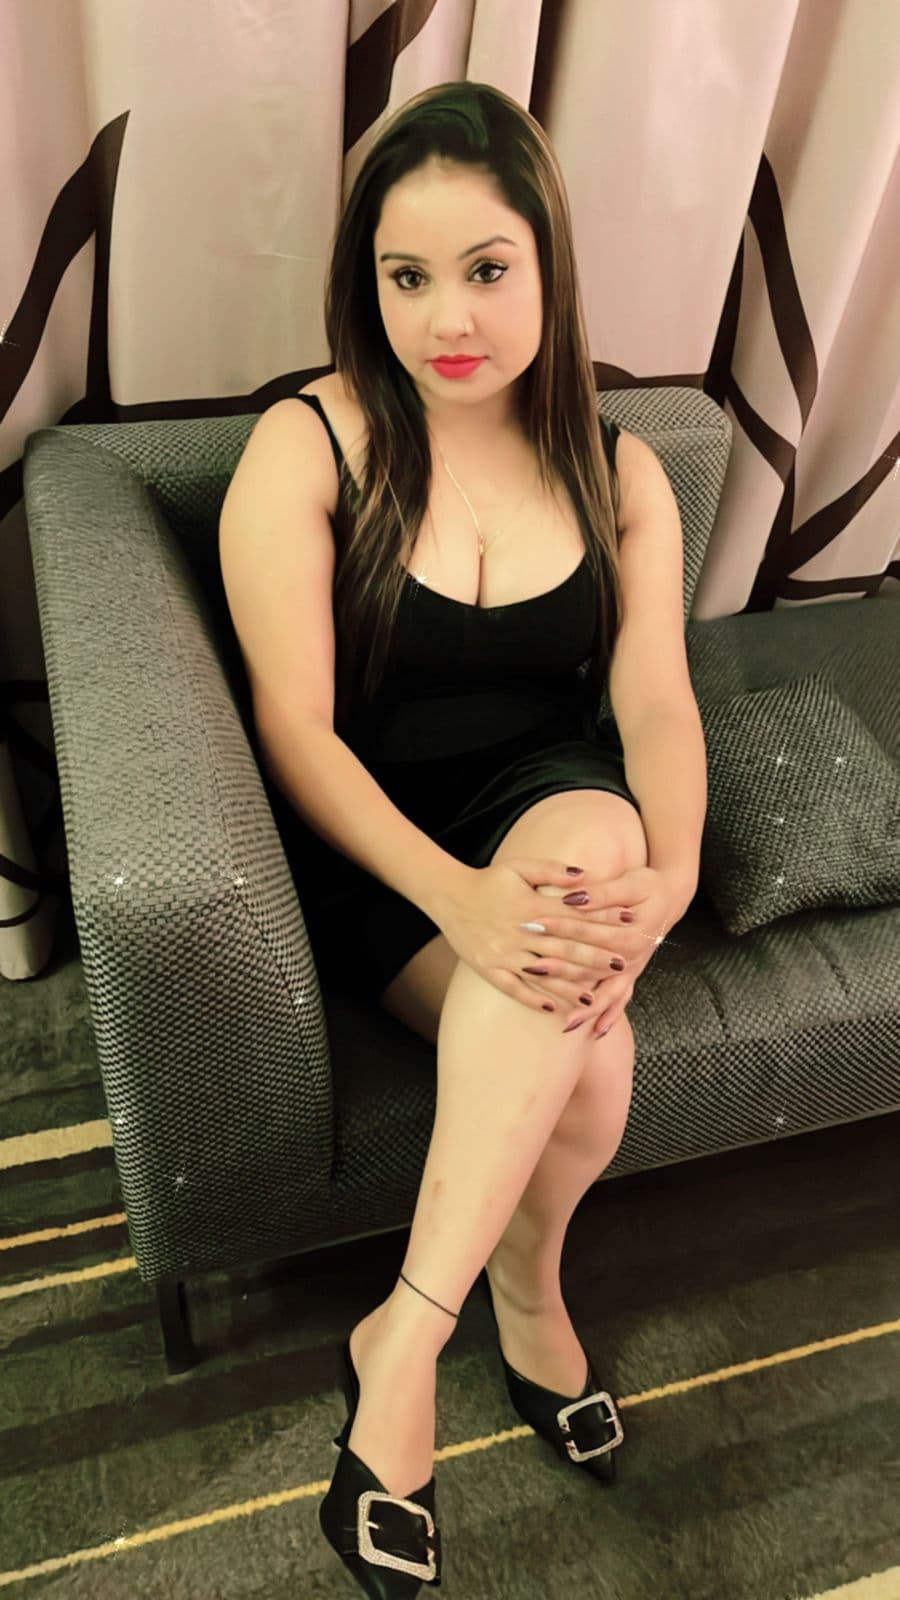 Exclusive call girls Gurgaon available 24/7